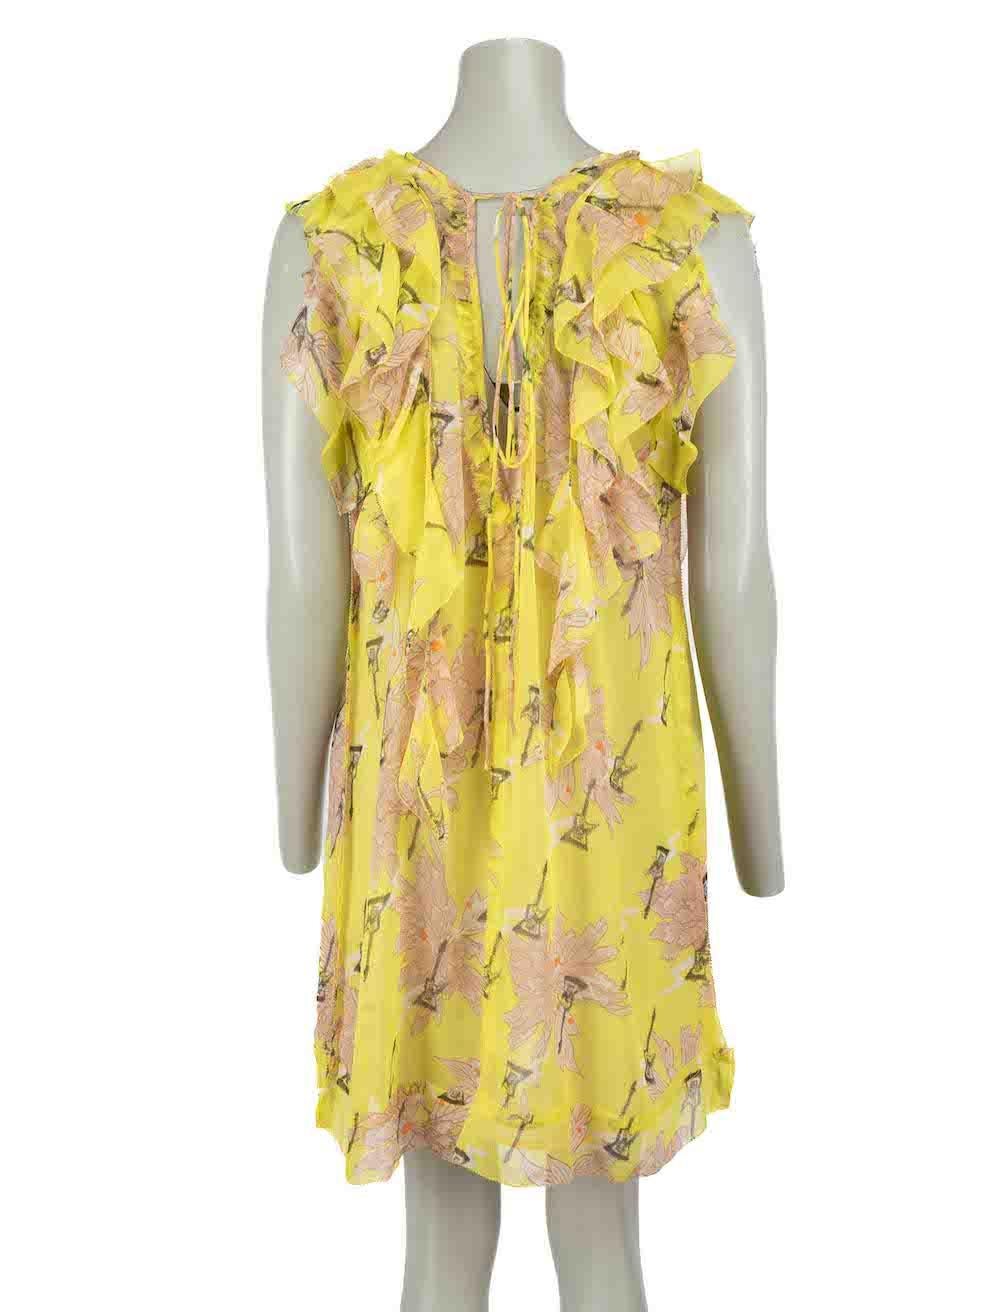 Zadig & Voltaire Yellow Floral Ruffle Mini Dress Size XS In Excellent Condition For Sale In London, GB